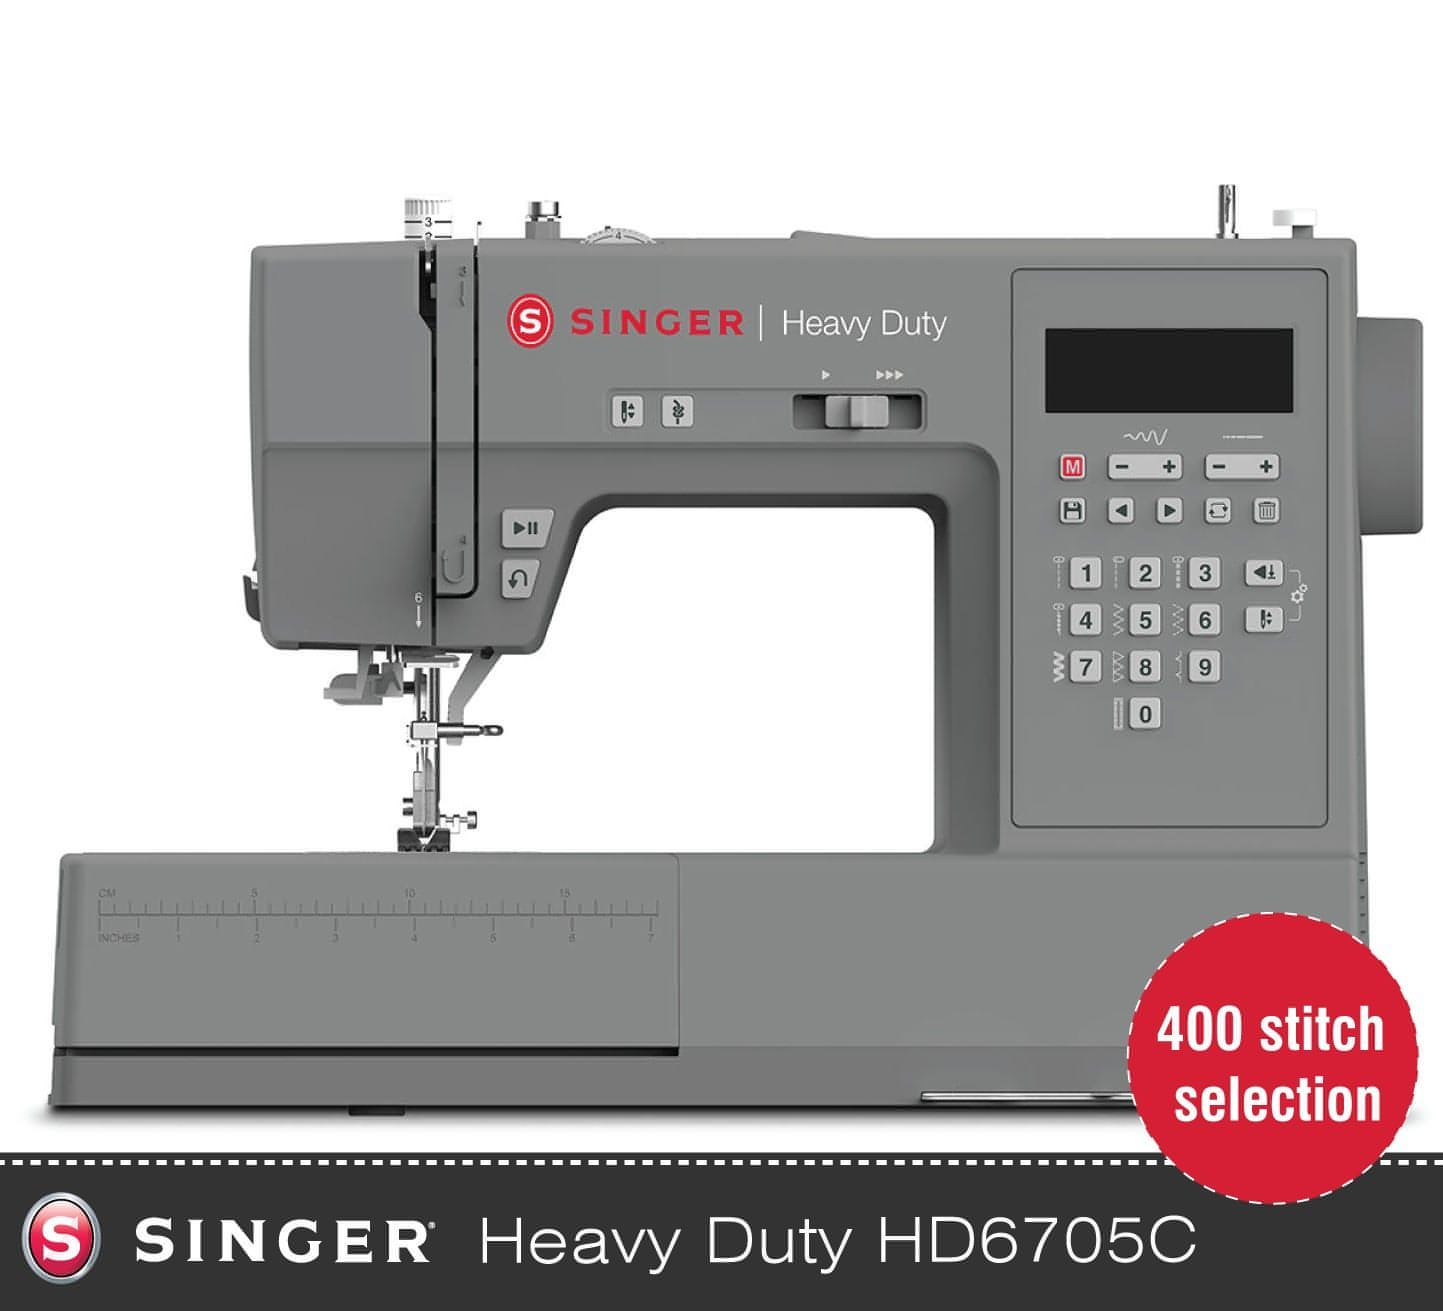 Singer Heavy Duty HD6705 Sewing Machine - 60% stronger and 30% faster